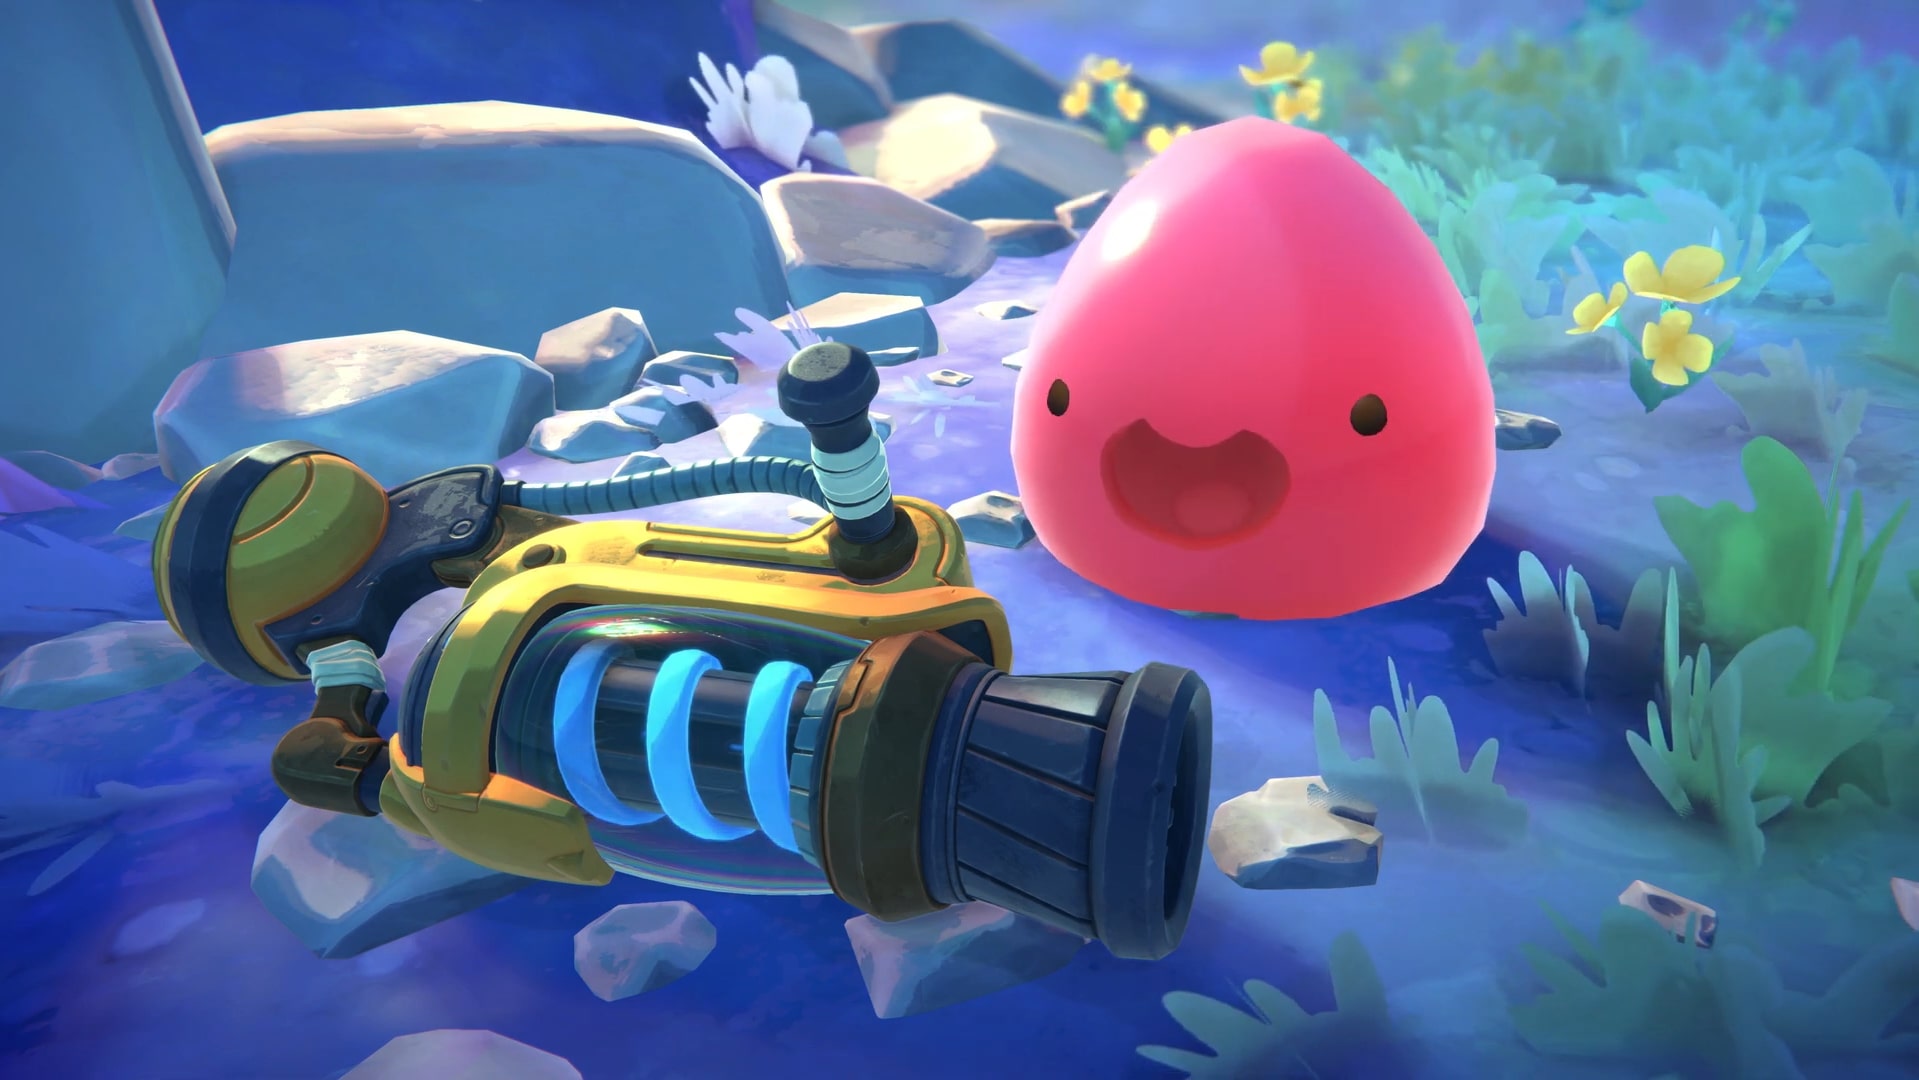  Slime Rancher 2 will be bouncing onto PC in 2022 